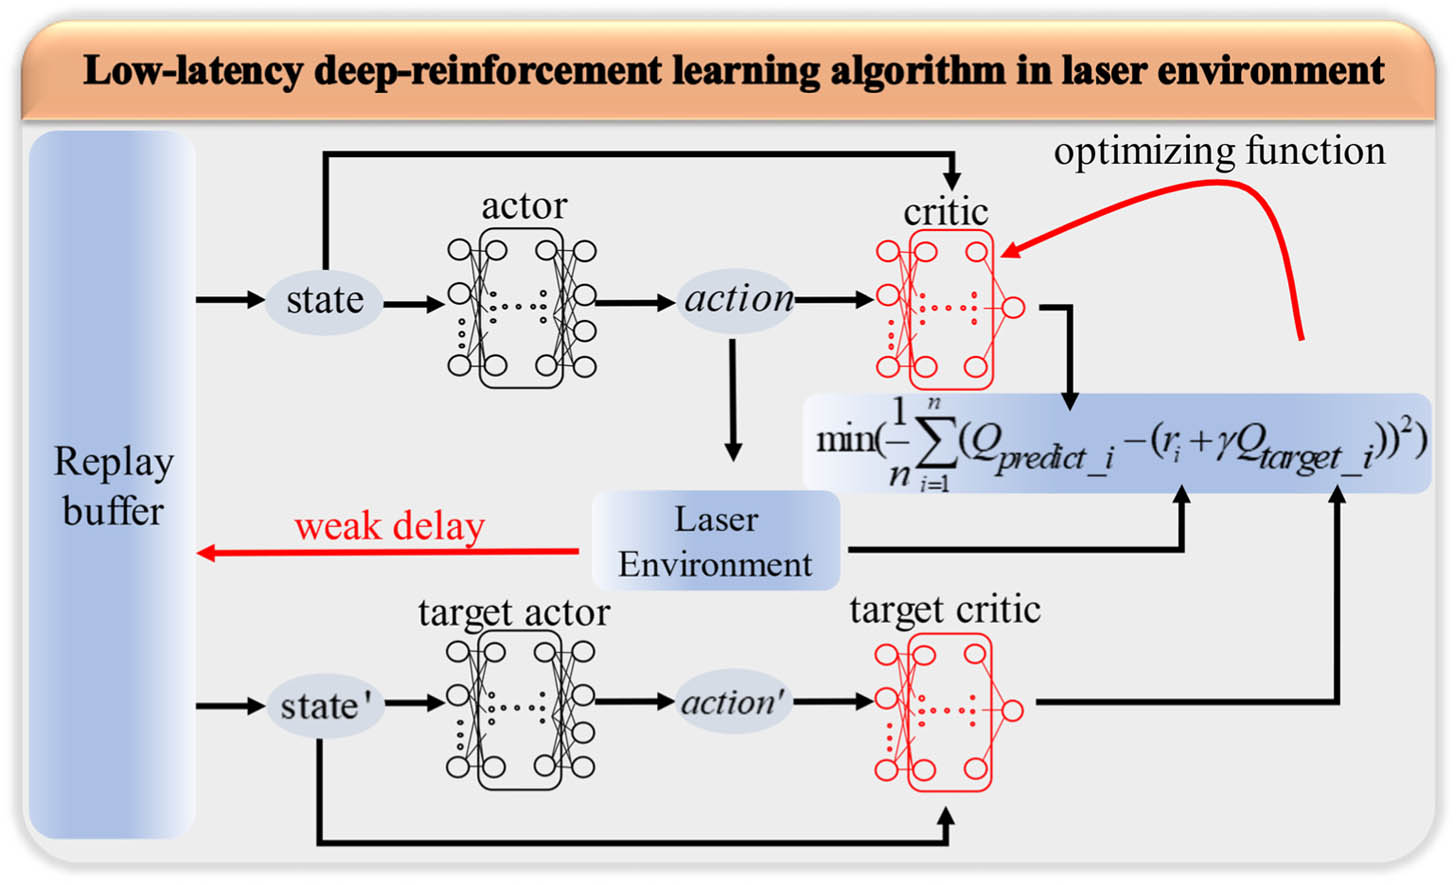 Structure of the low-latency deep-reinforcement learning algorithm based on DDPG strategy in the laser environment.